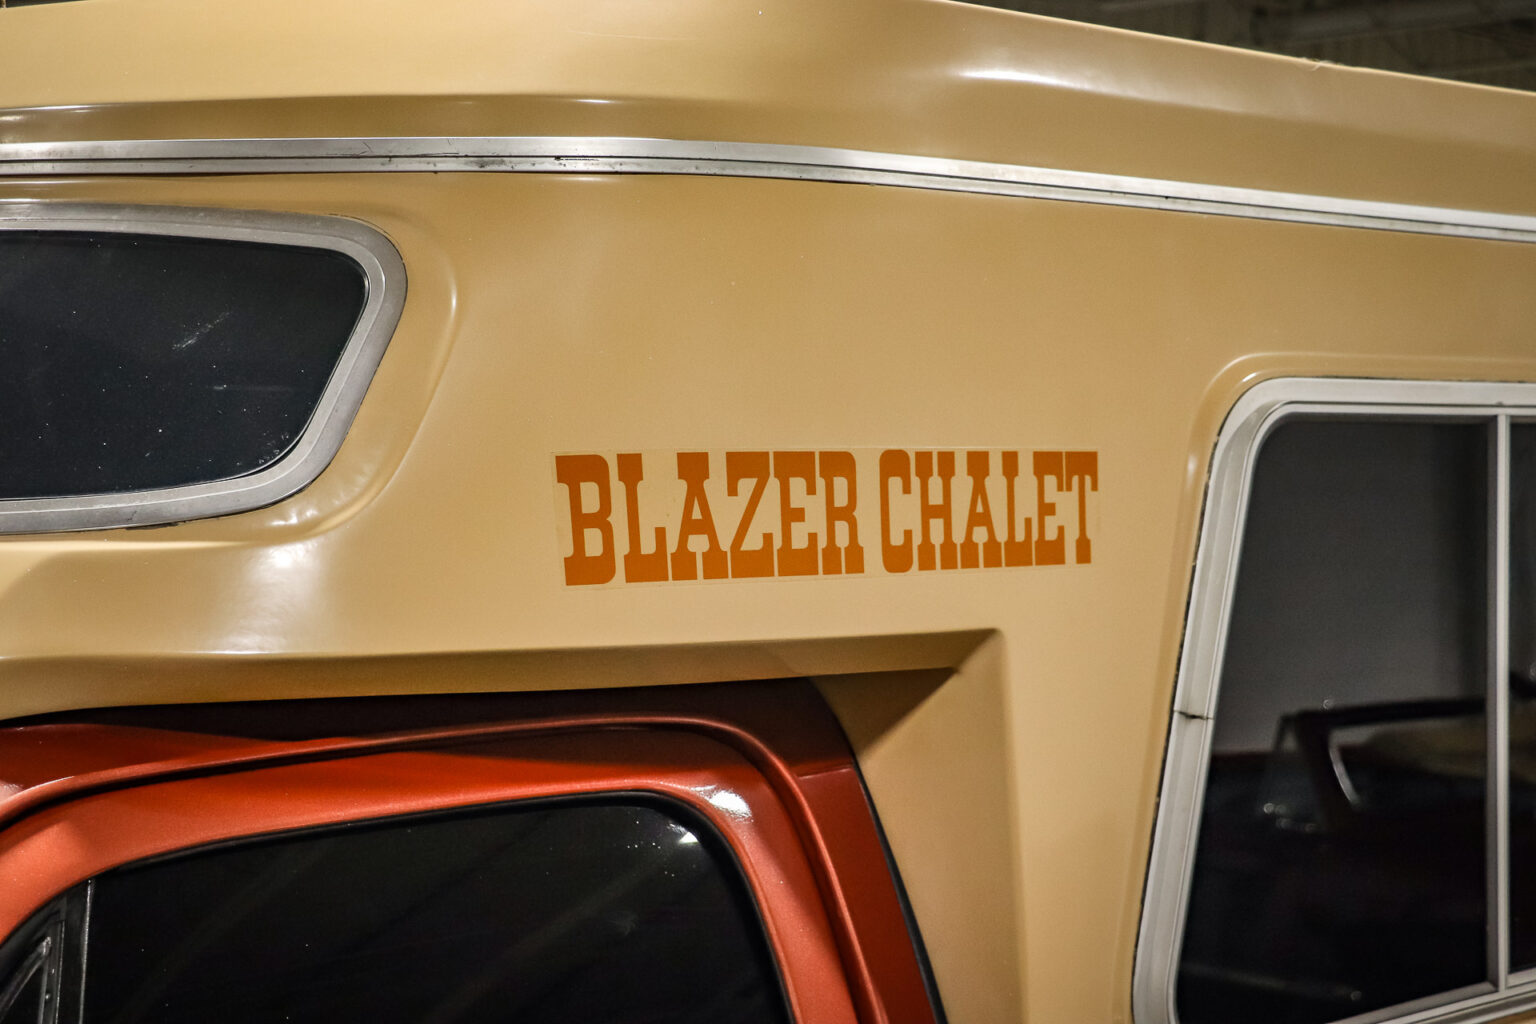 upclose on the vinyl graphics for a 1977 Chevrolet Blazer Chalet is the king of the vintage campers